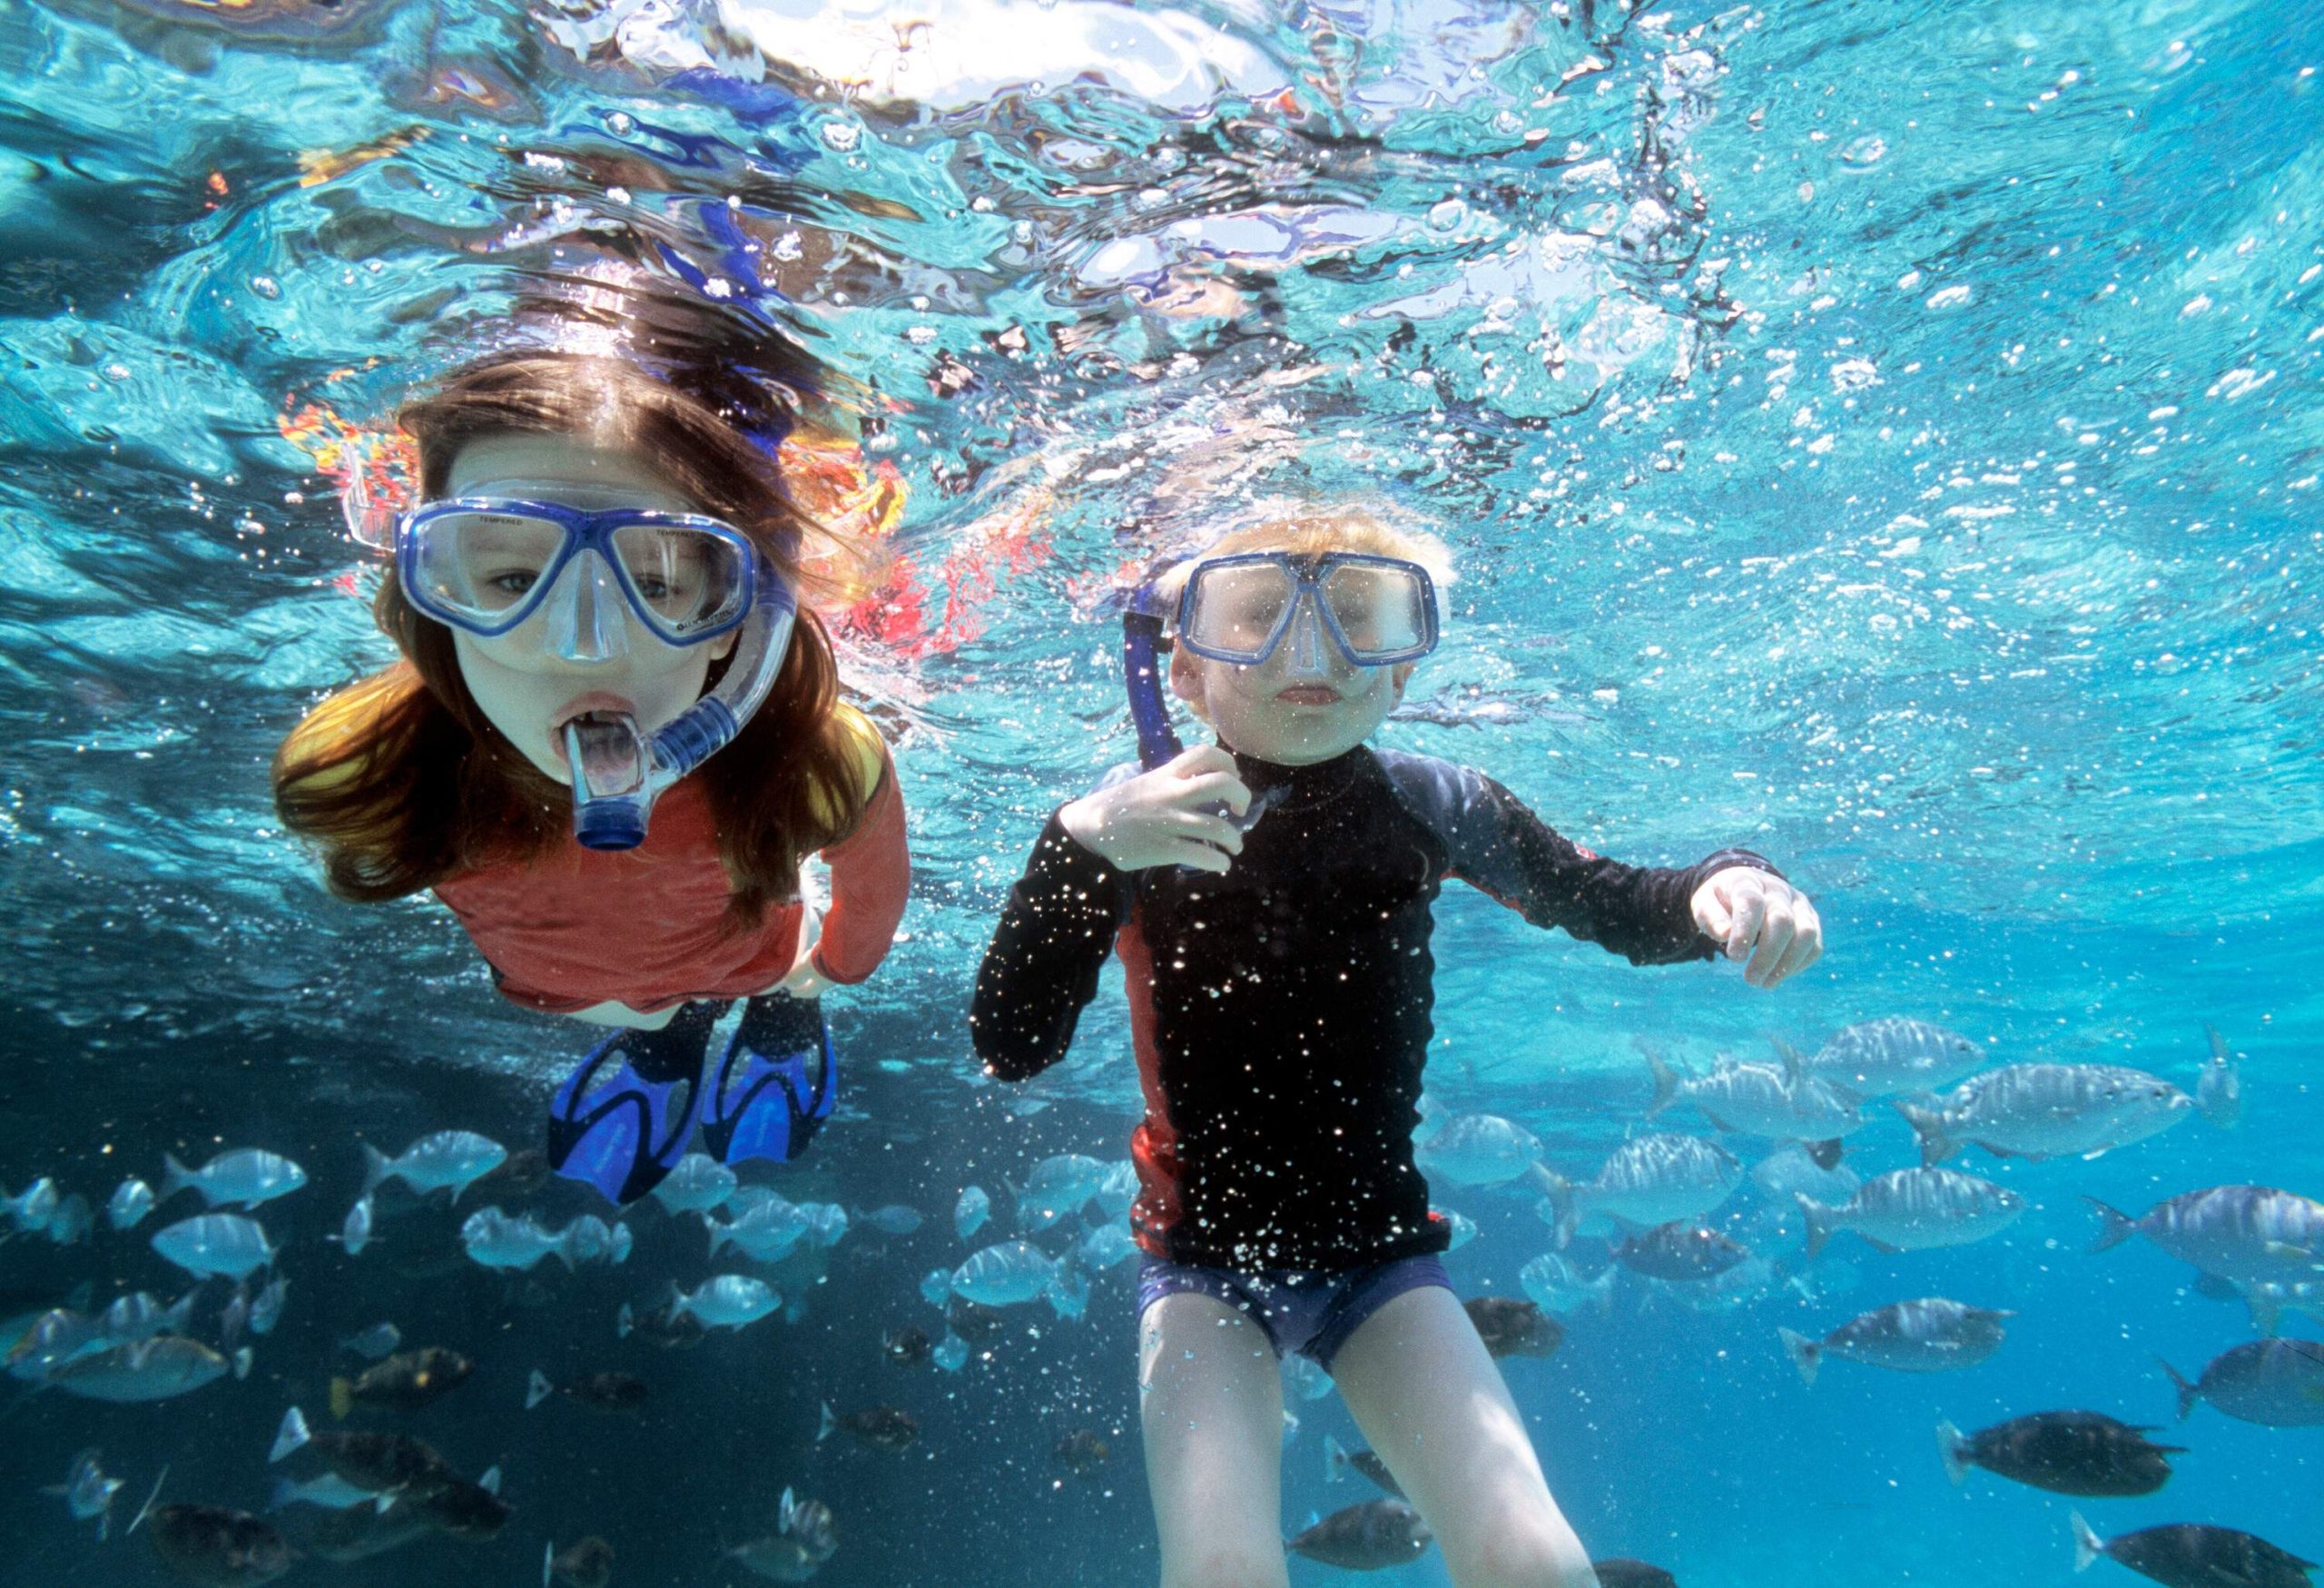 Two kids are snorkelling under water, surrounded by lovely, colourful fish.